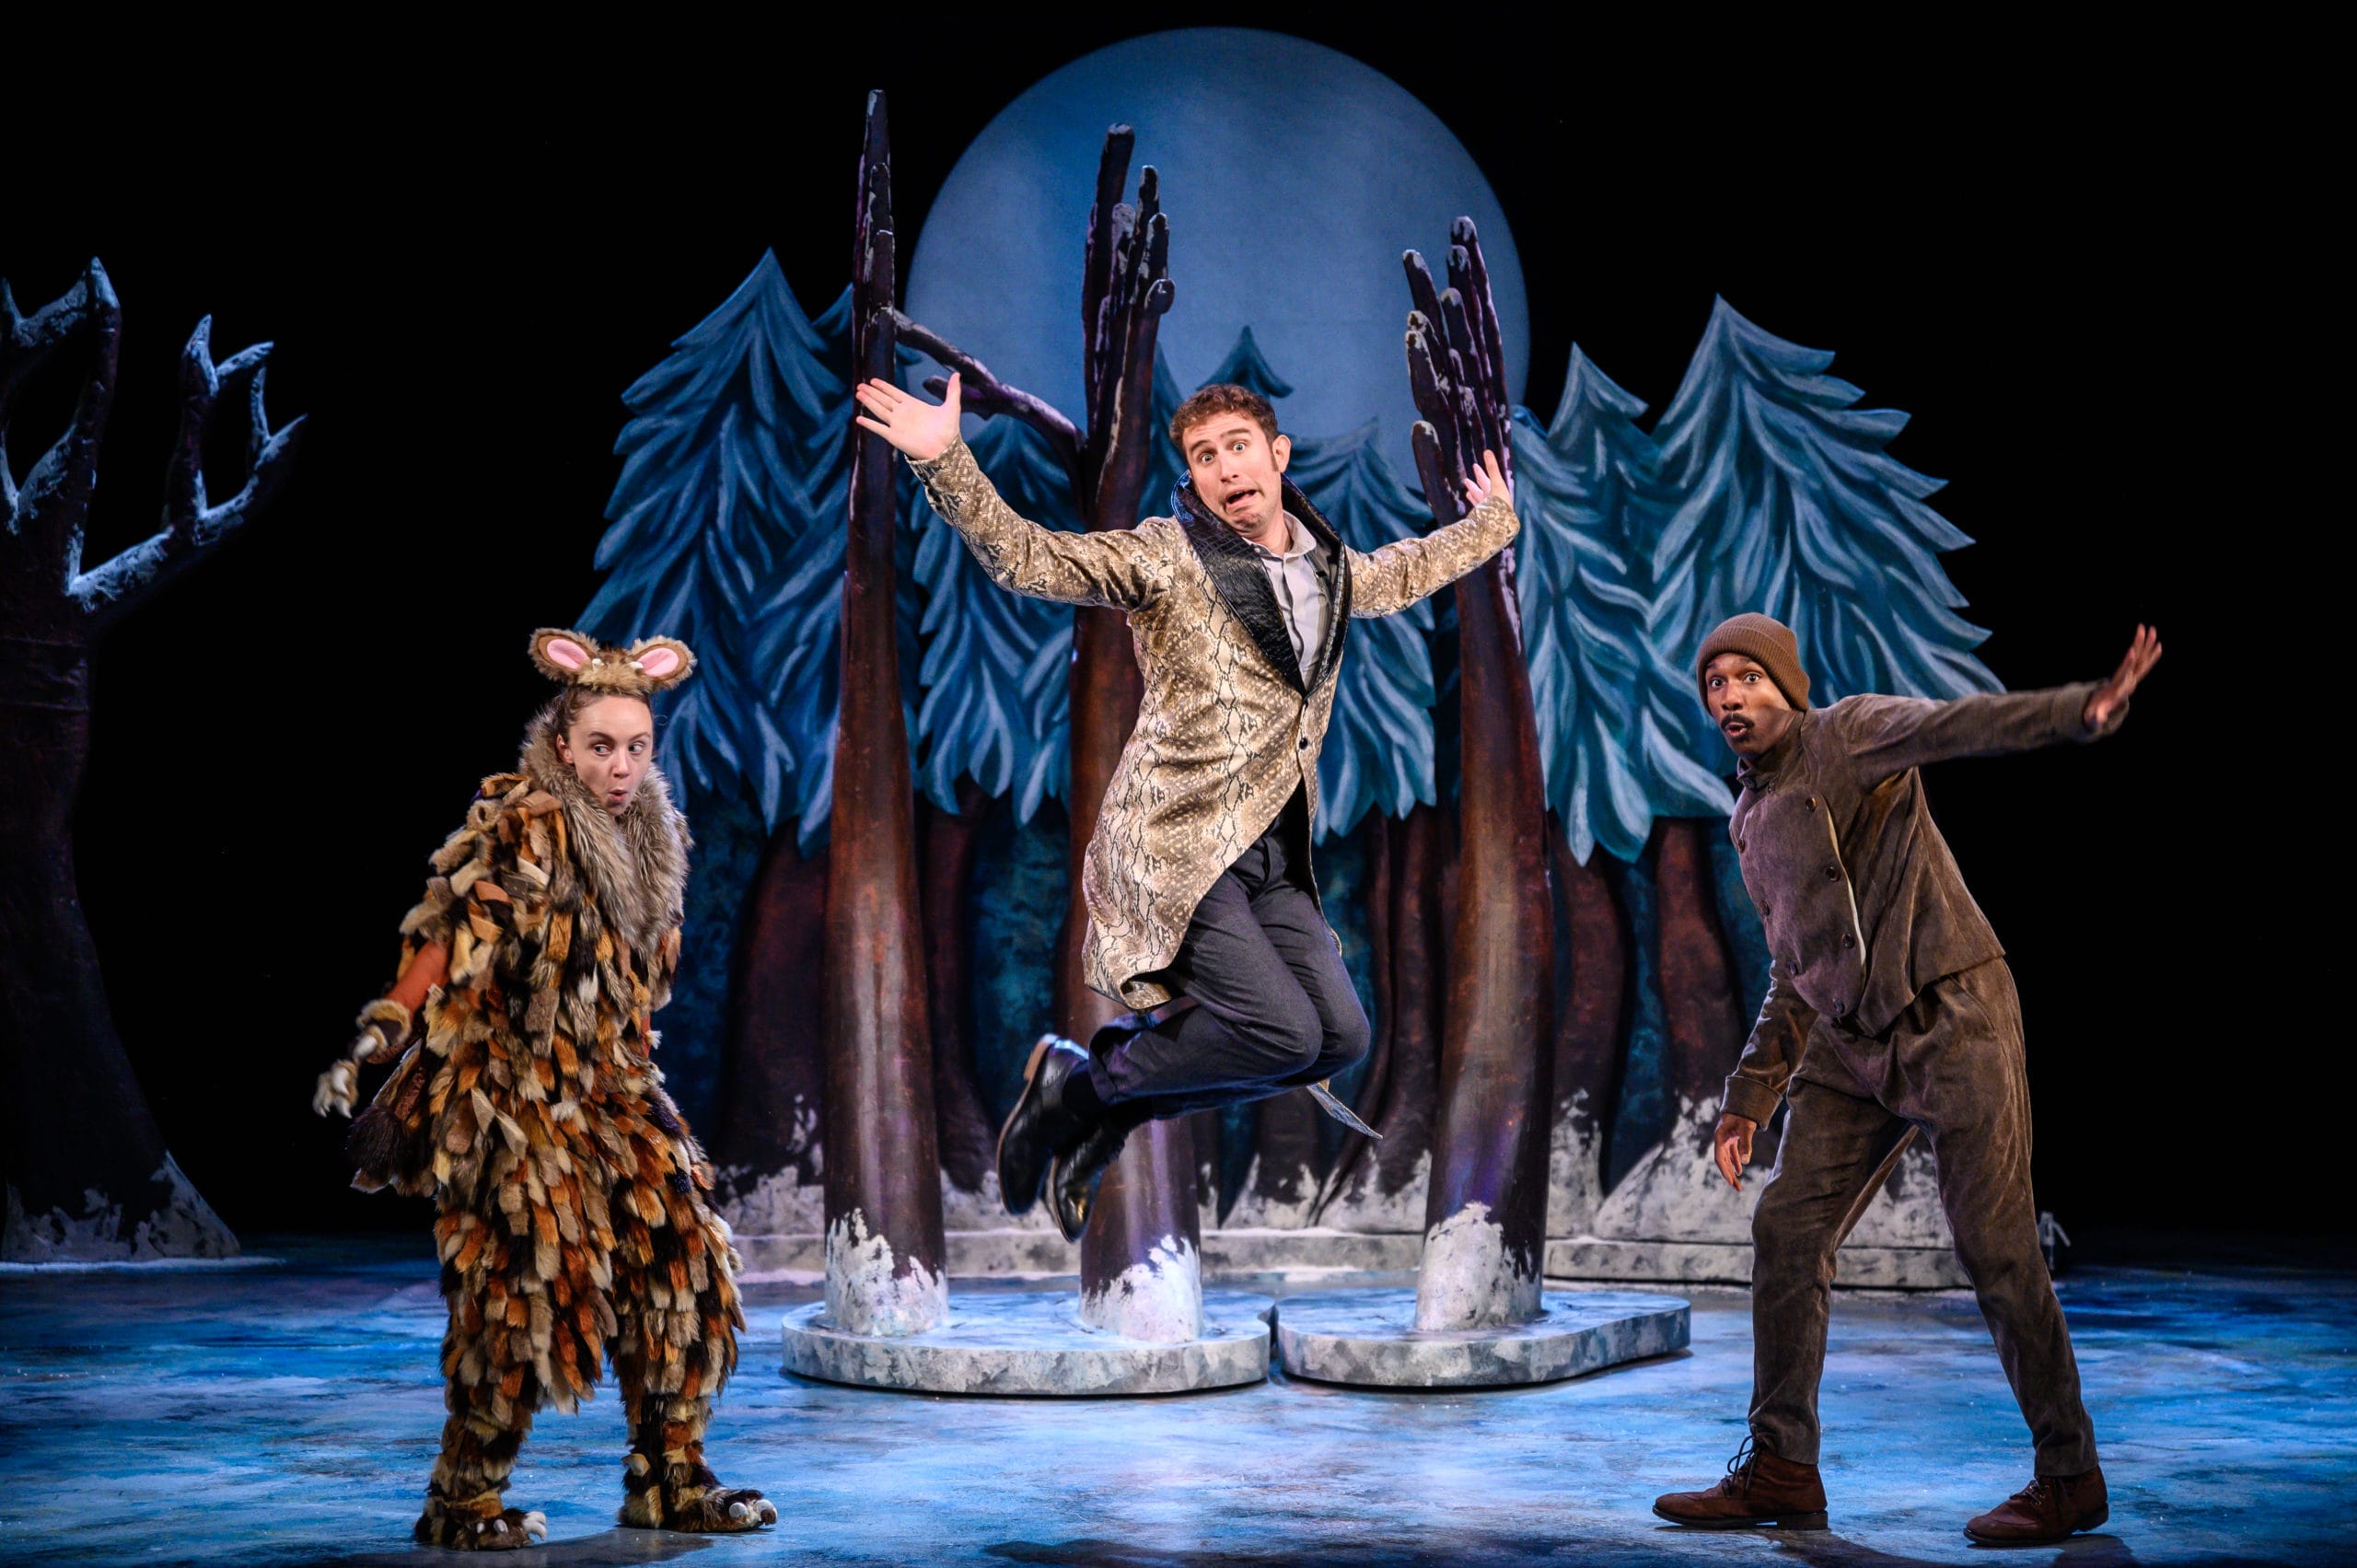 Production shot from The Gruffalo's Child artsdepot! The Gruffalo's Child and Mouse look out to the audience with Snake in the middle. Snake is leaping in the air with a silly expression, wearing a long snakeskin coat.